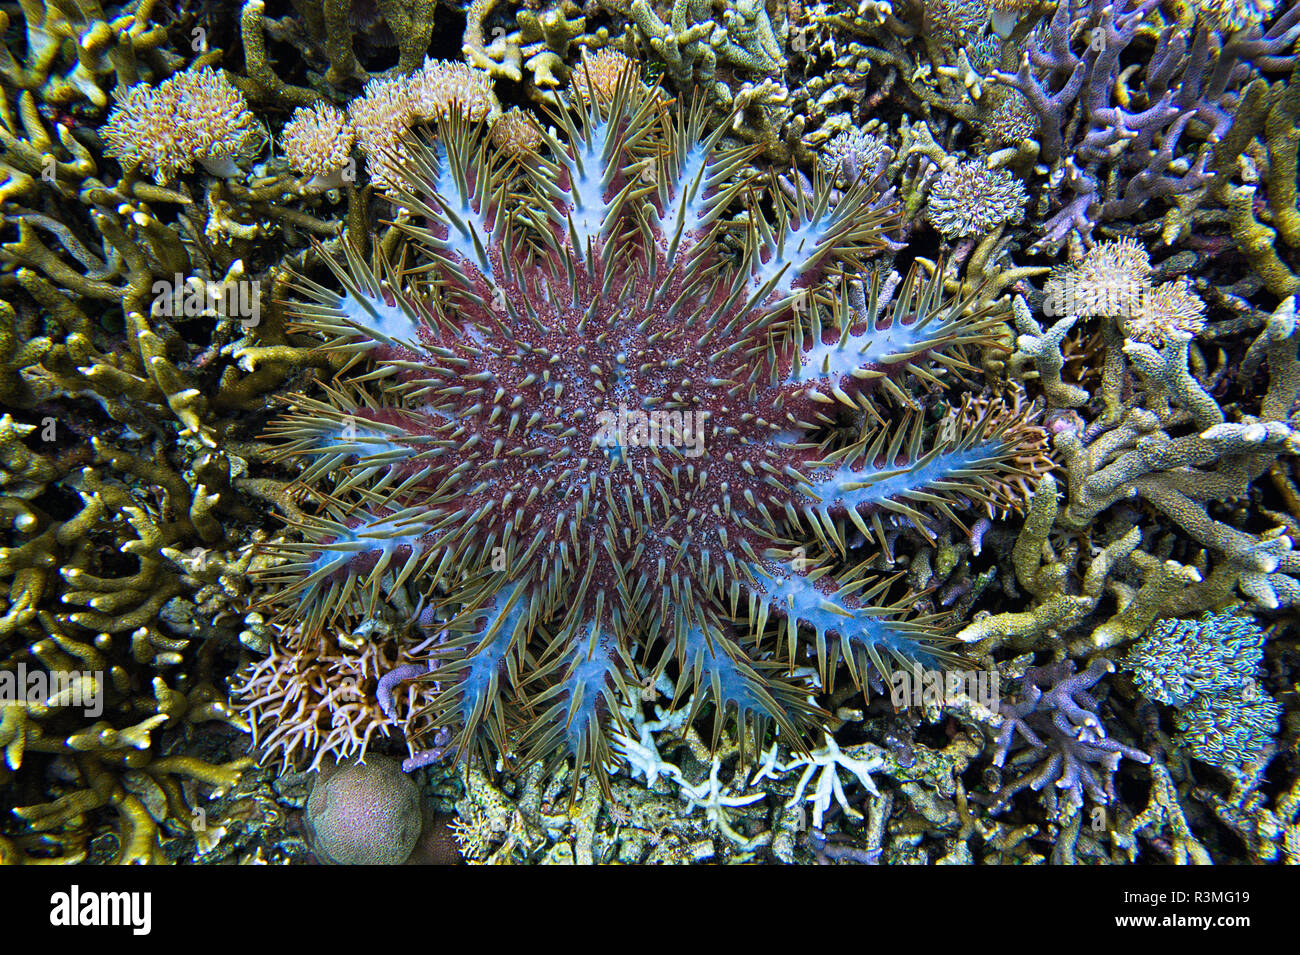 Crown-of-thorns sea star (Acanthaster planci) feeding on coral reef, Sulawesi. Stock Photo